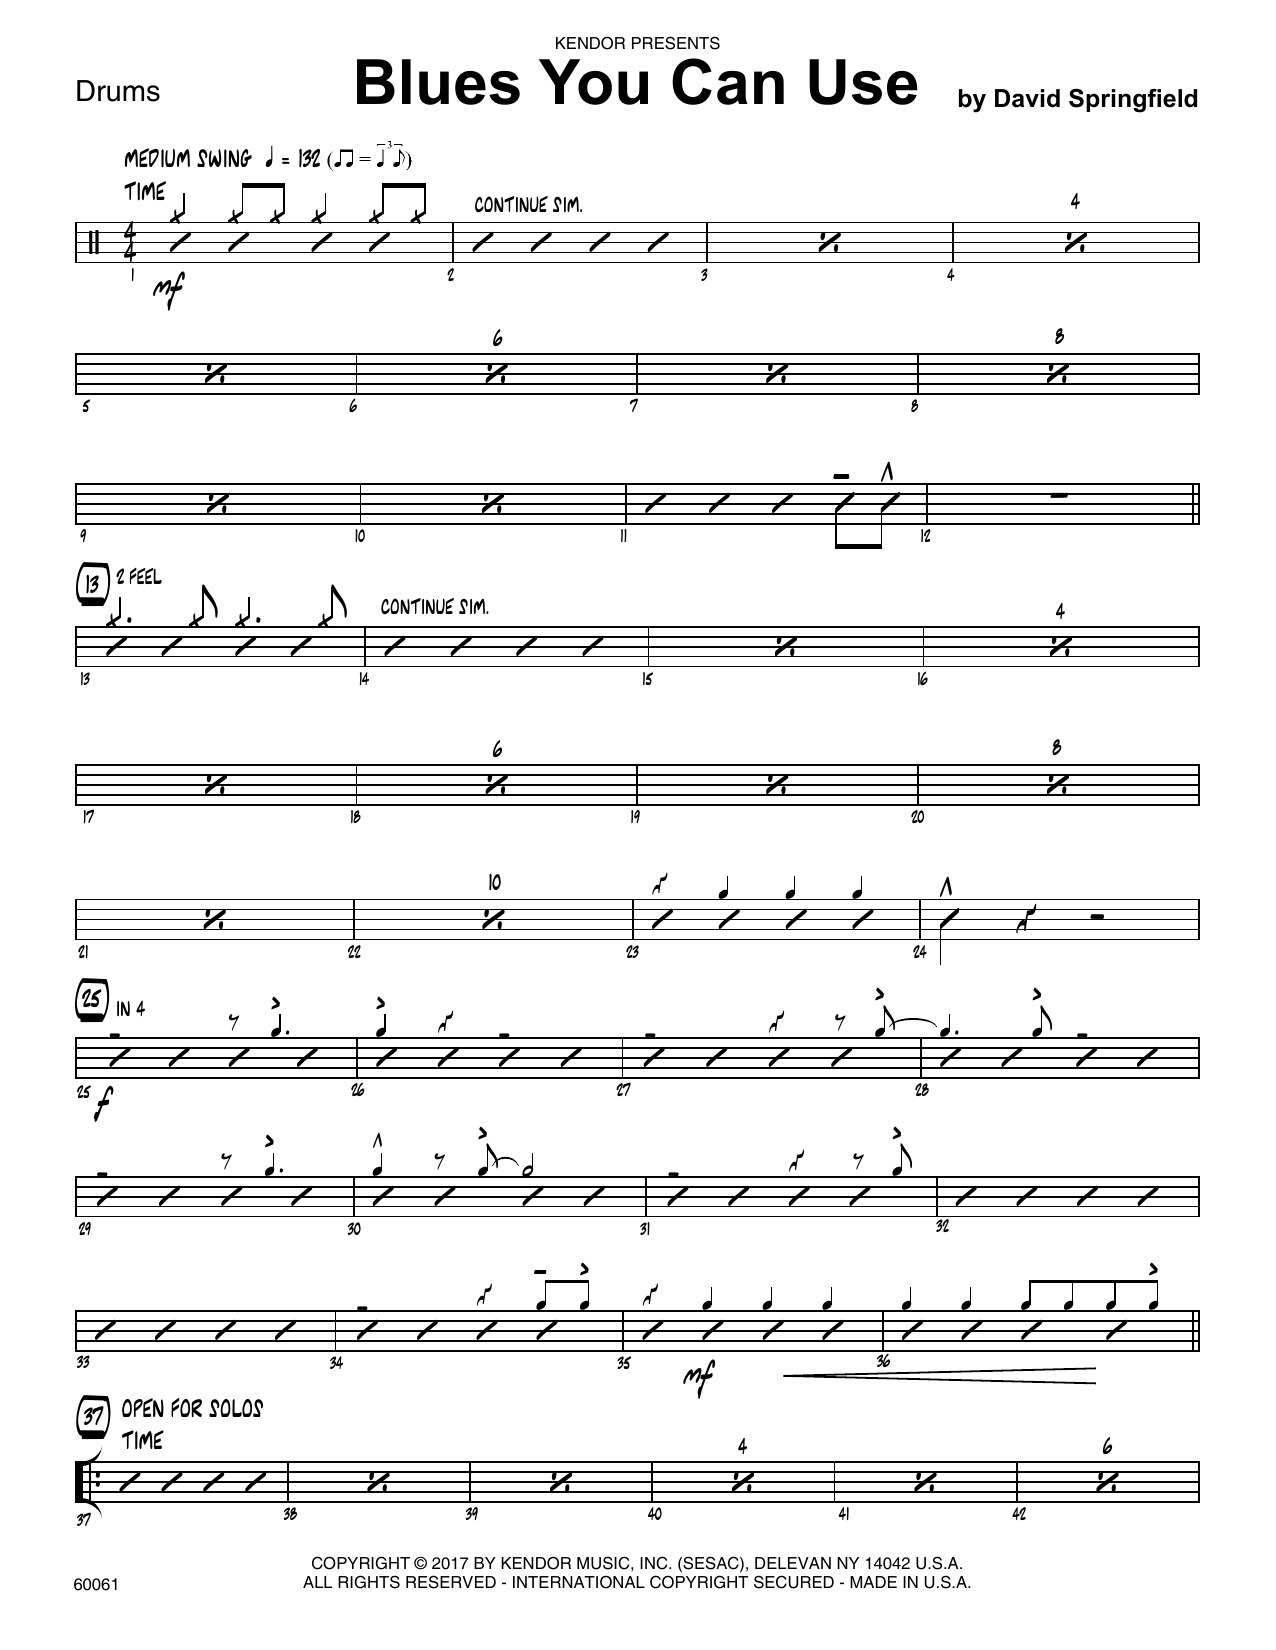 Download David Springfield Blues You Can Use - Drum Set sheet music and printable PDF score & Jazz music notes